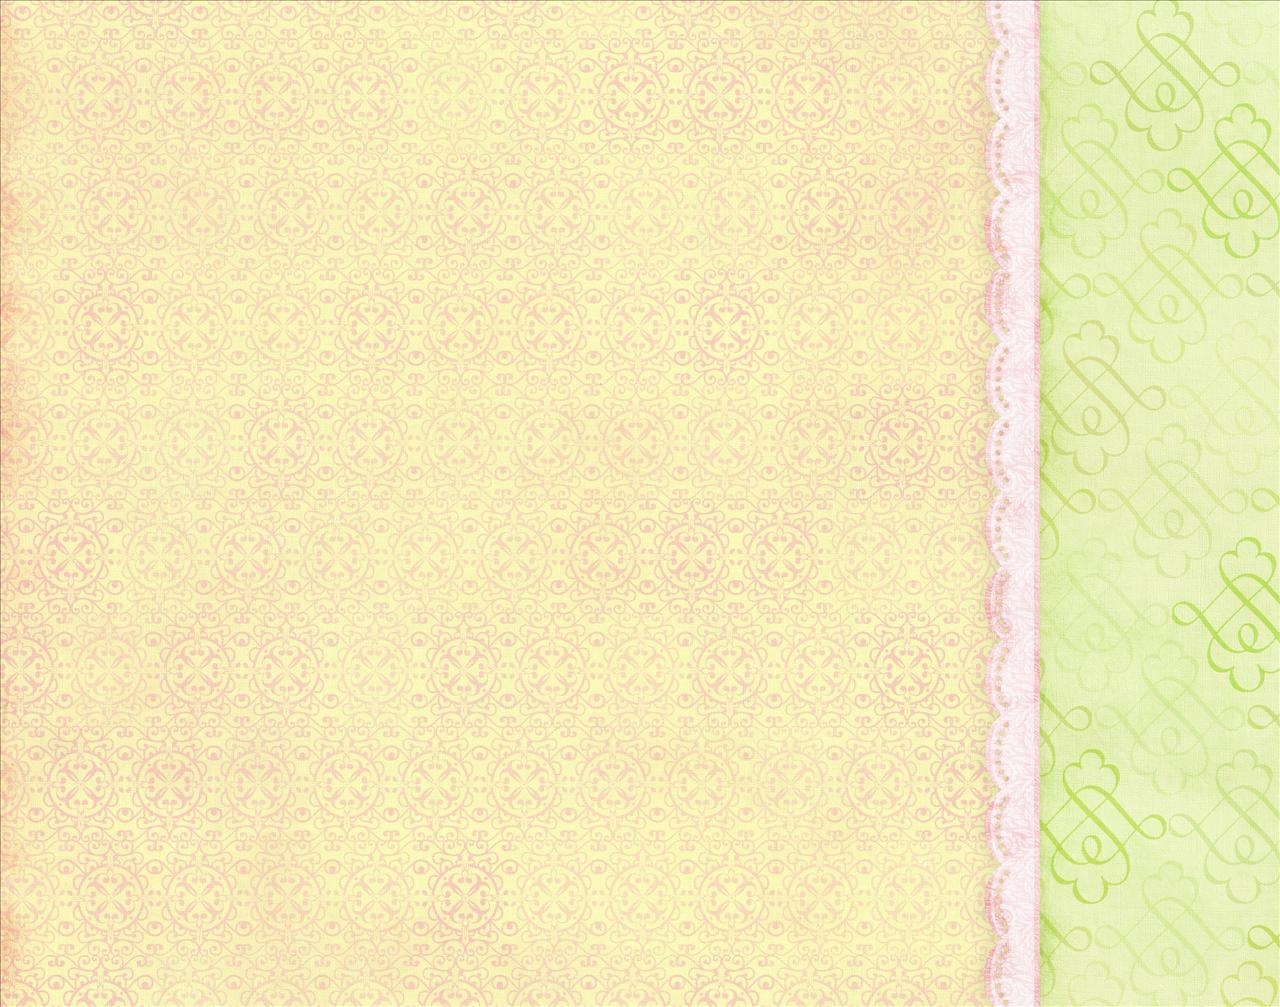 Yellow and green Backgrounds